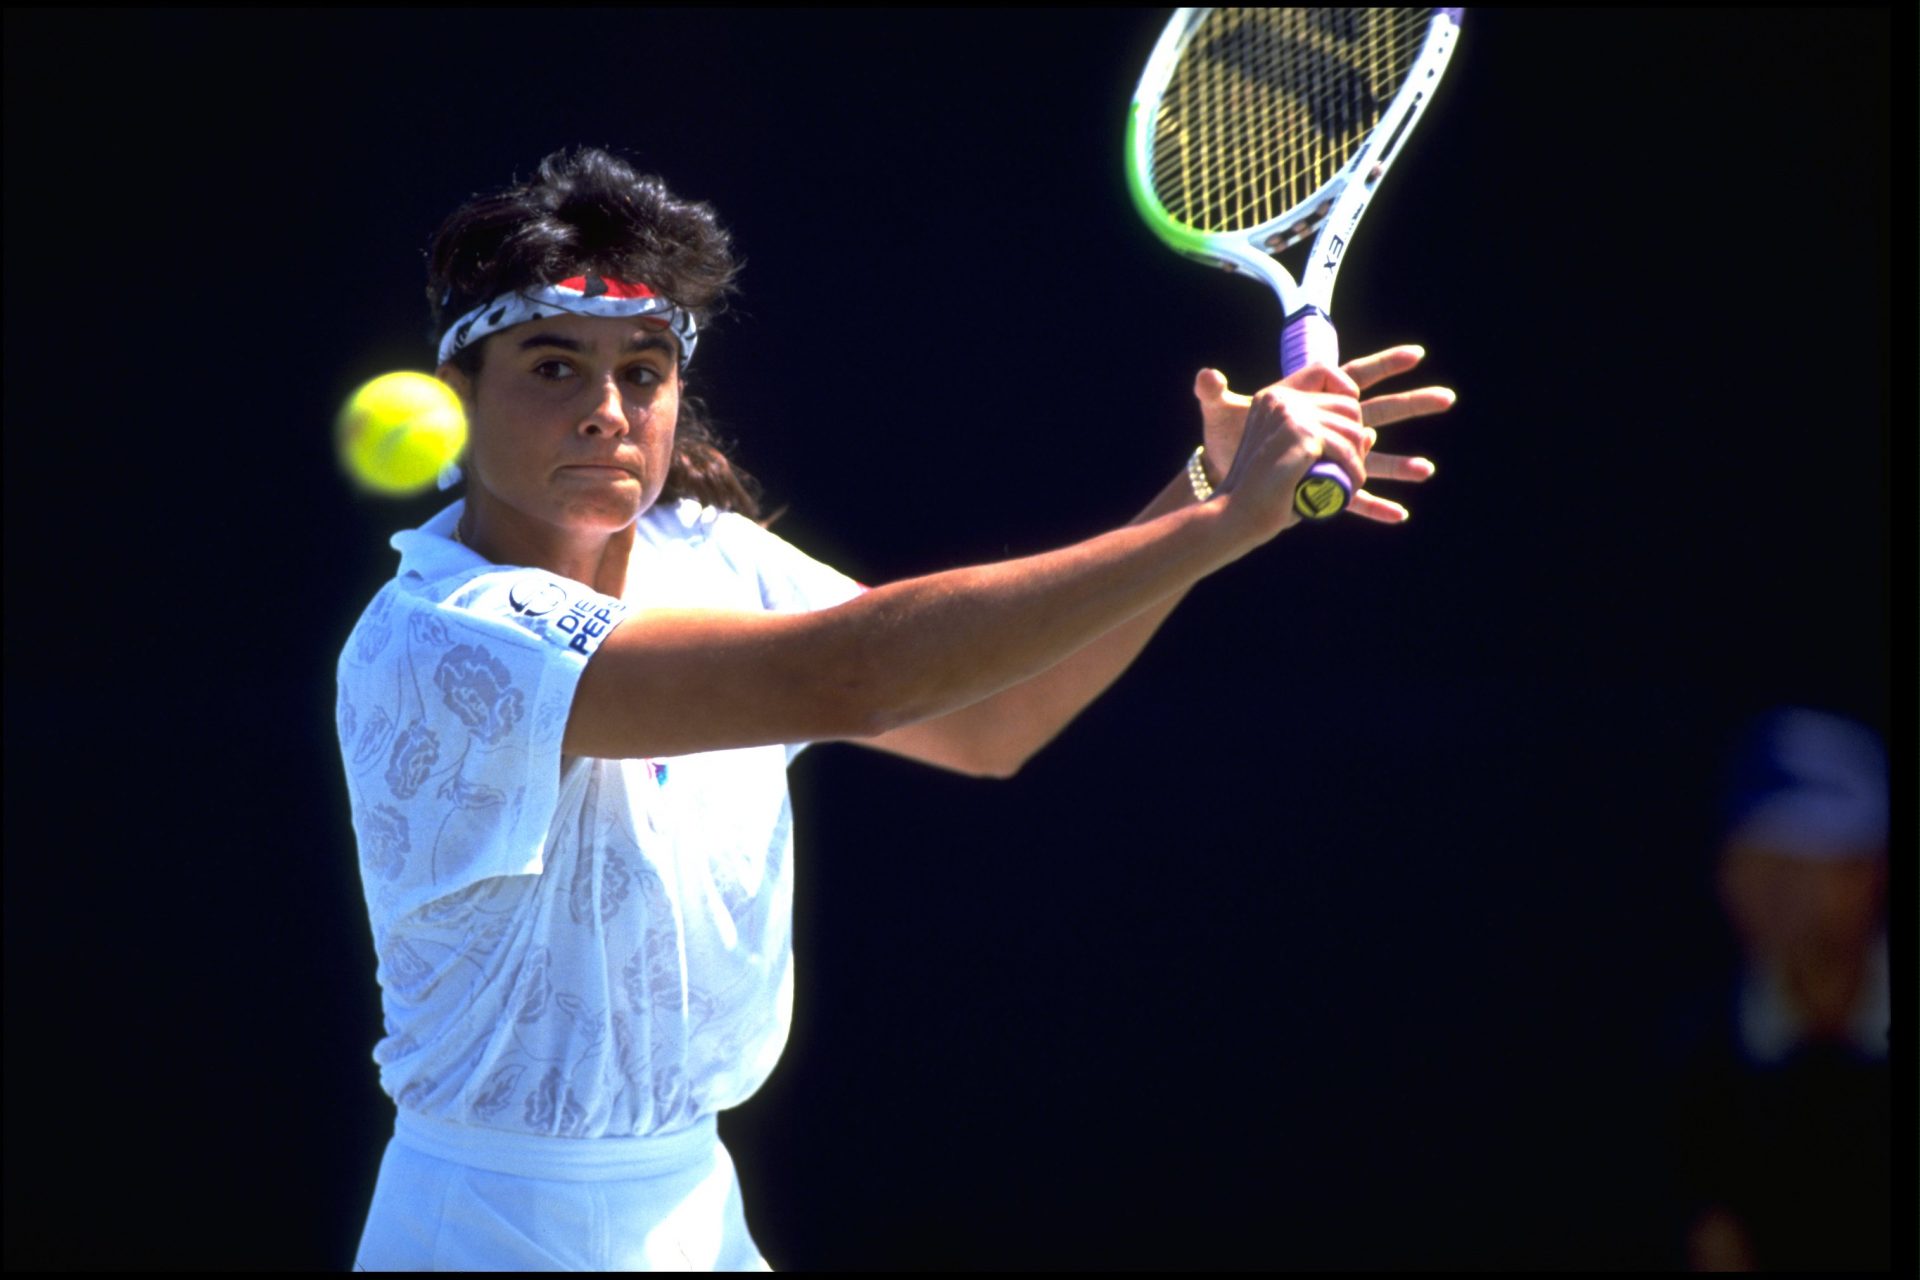 Perfumes, early retirement and a fierce rivalry: What happened to Gabriela Sabatini?